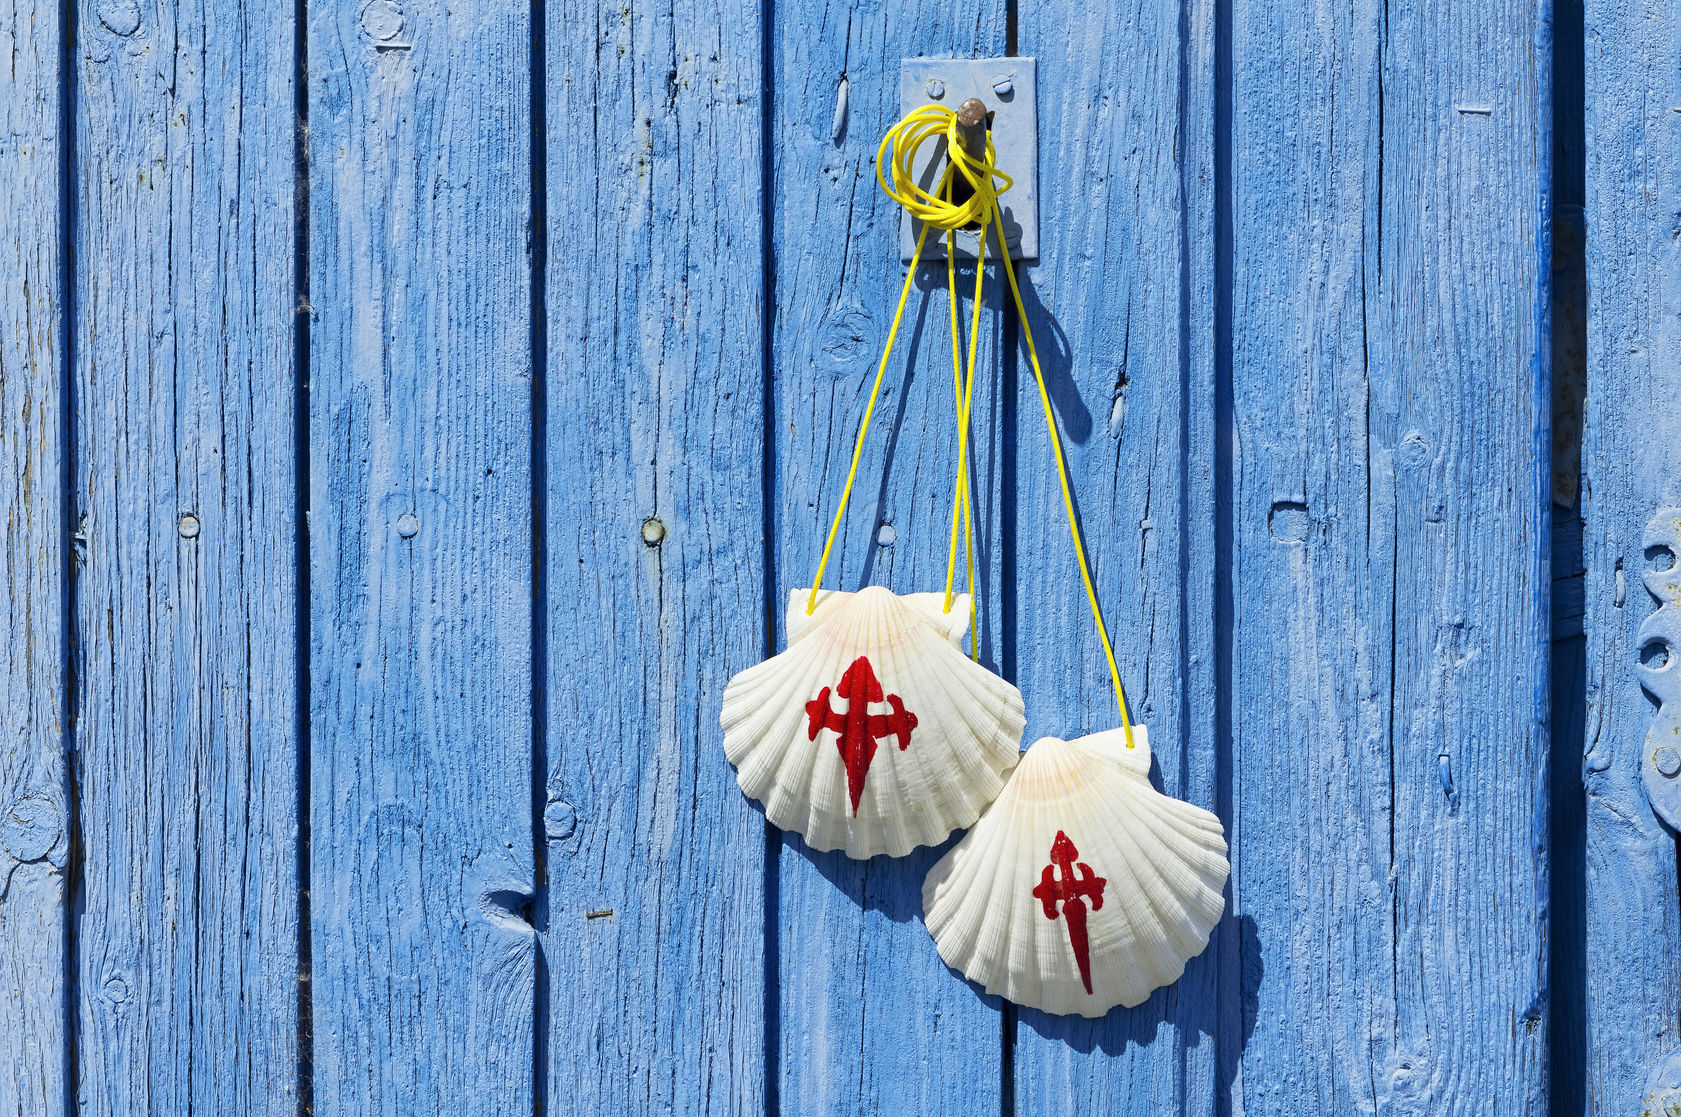 Scallop Shell hanging on a door